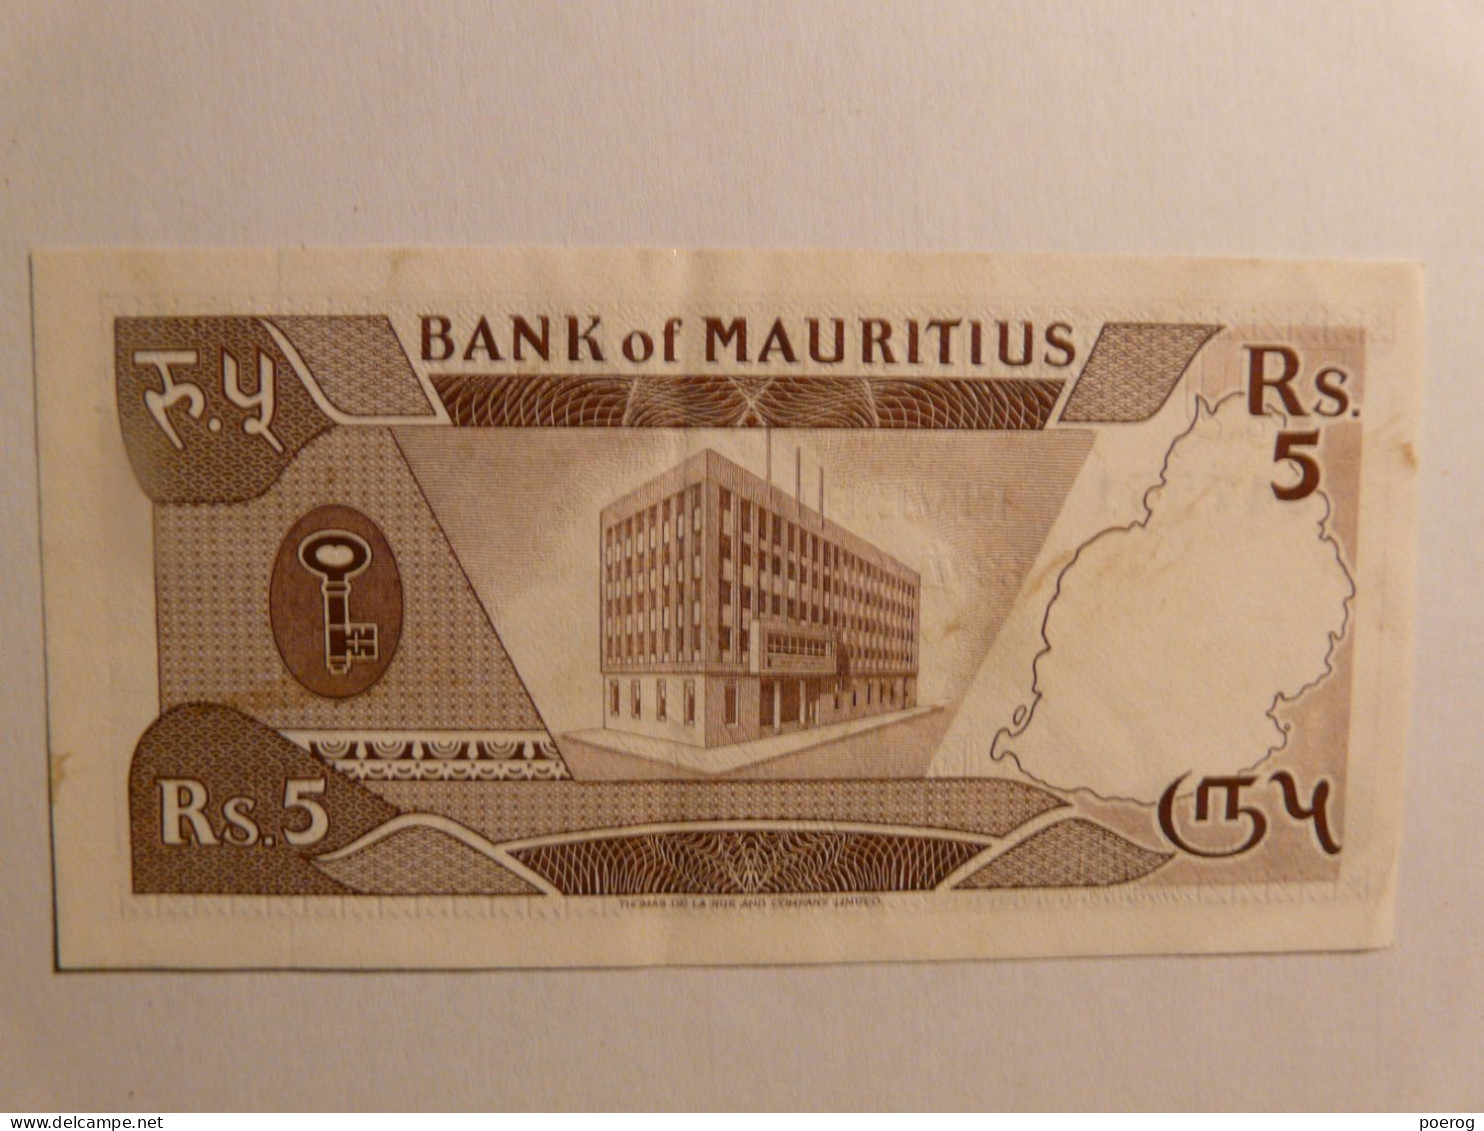 BILLET ILE MAURICE MAURITIUS - 5 RUPEES CIRCA 1990 - BILLET DE BANQUE - A/I 347551 - 5 ROUPIES - Bank Note - Maurice